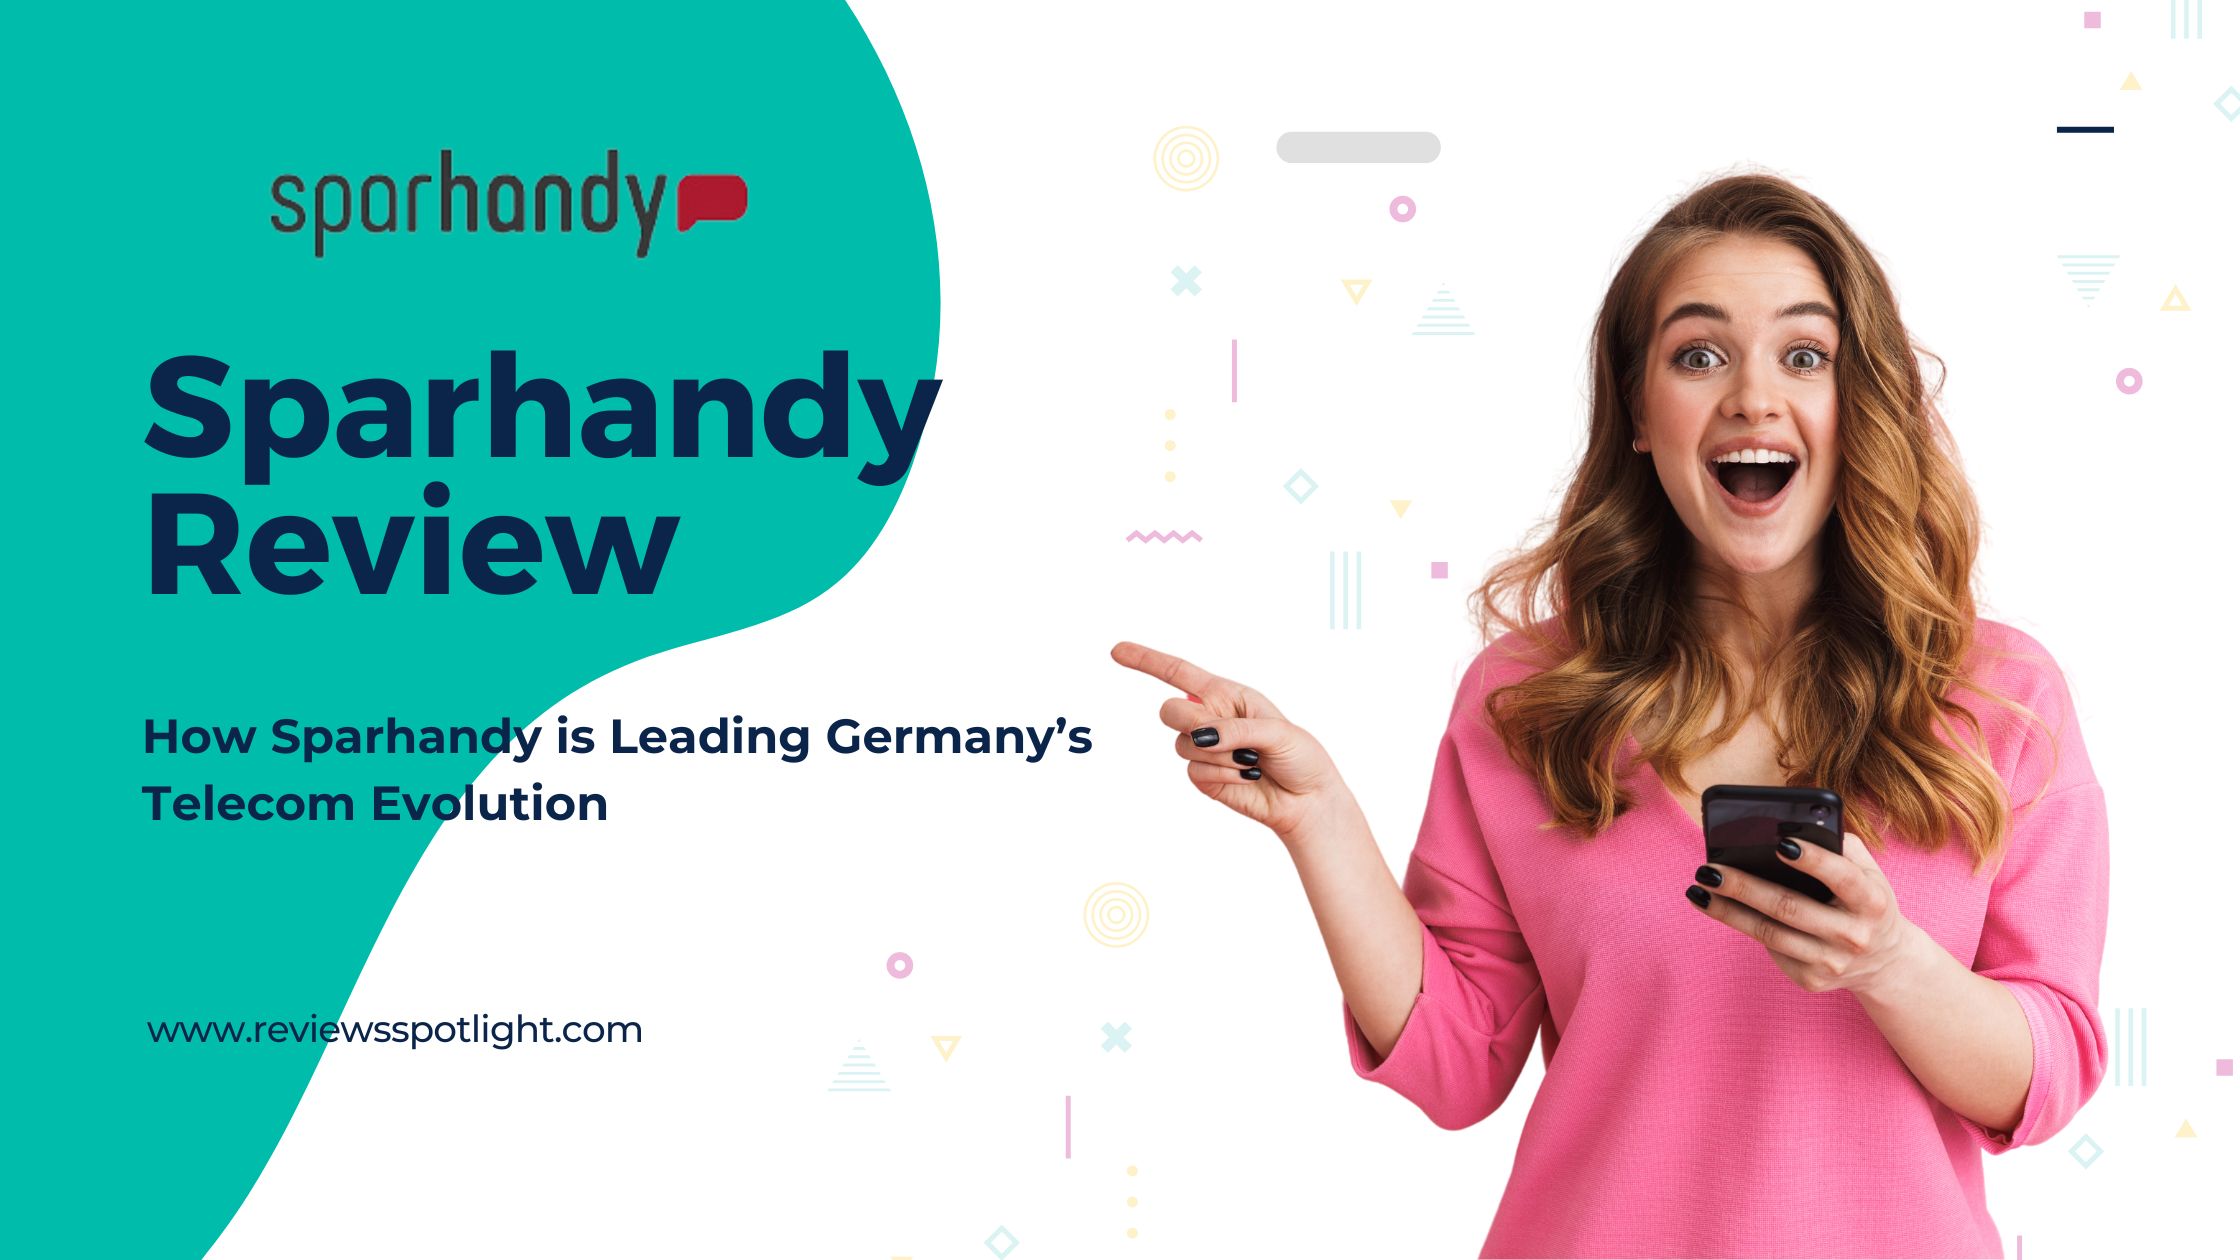 Sparhandy Review